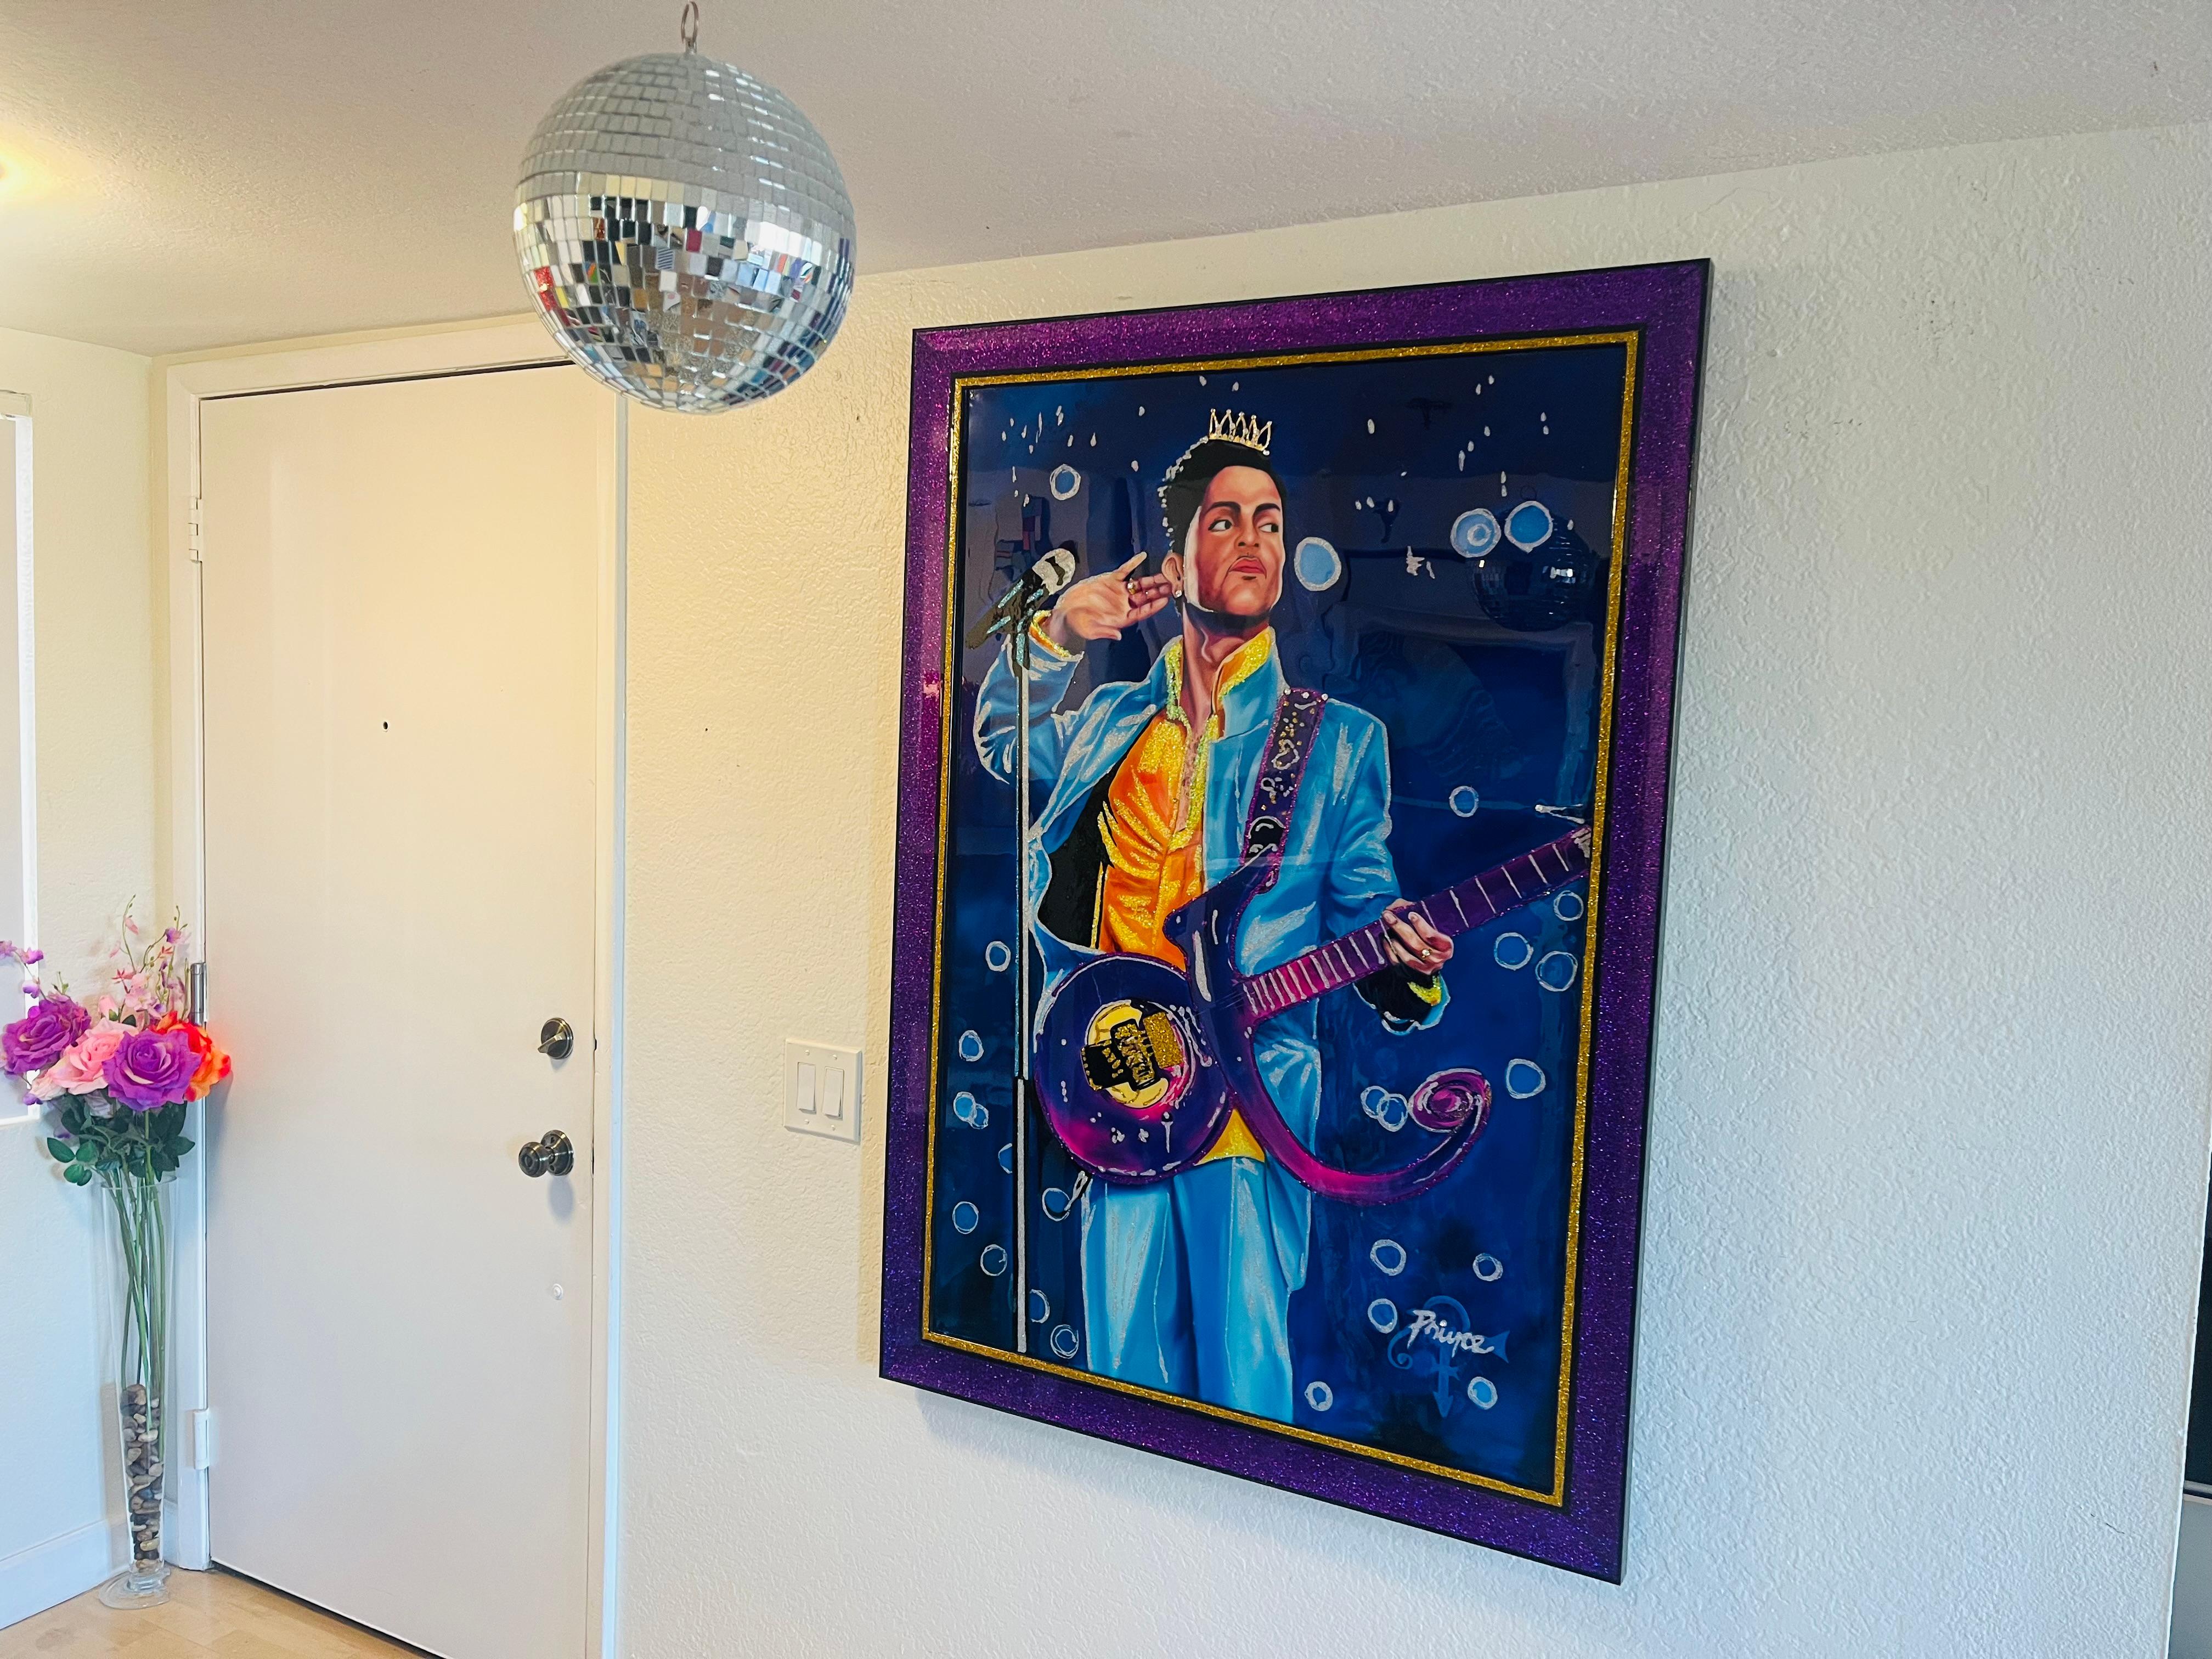                **ANNUAL SUPER SALE UNTIL JUNE 15TH ONLY**
*This Price Won't Be Repeated Again This Year-Take Advantage Of It*

KING PRINCE OF POP is one of the biggest painting homage to the one and only Prince.

The artist placed an improvised